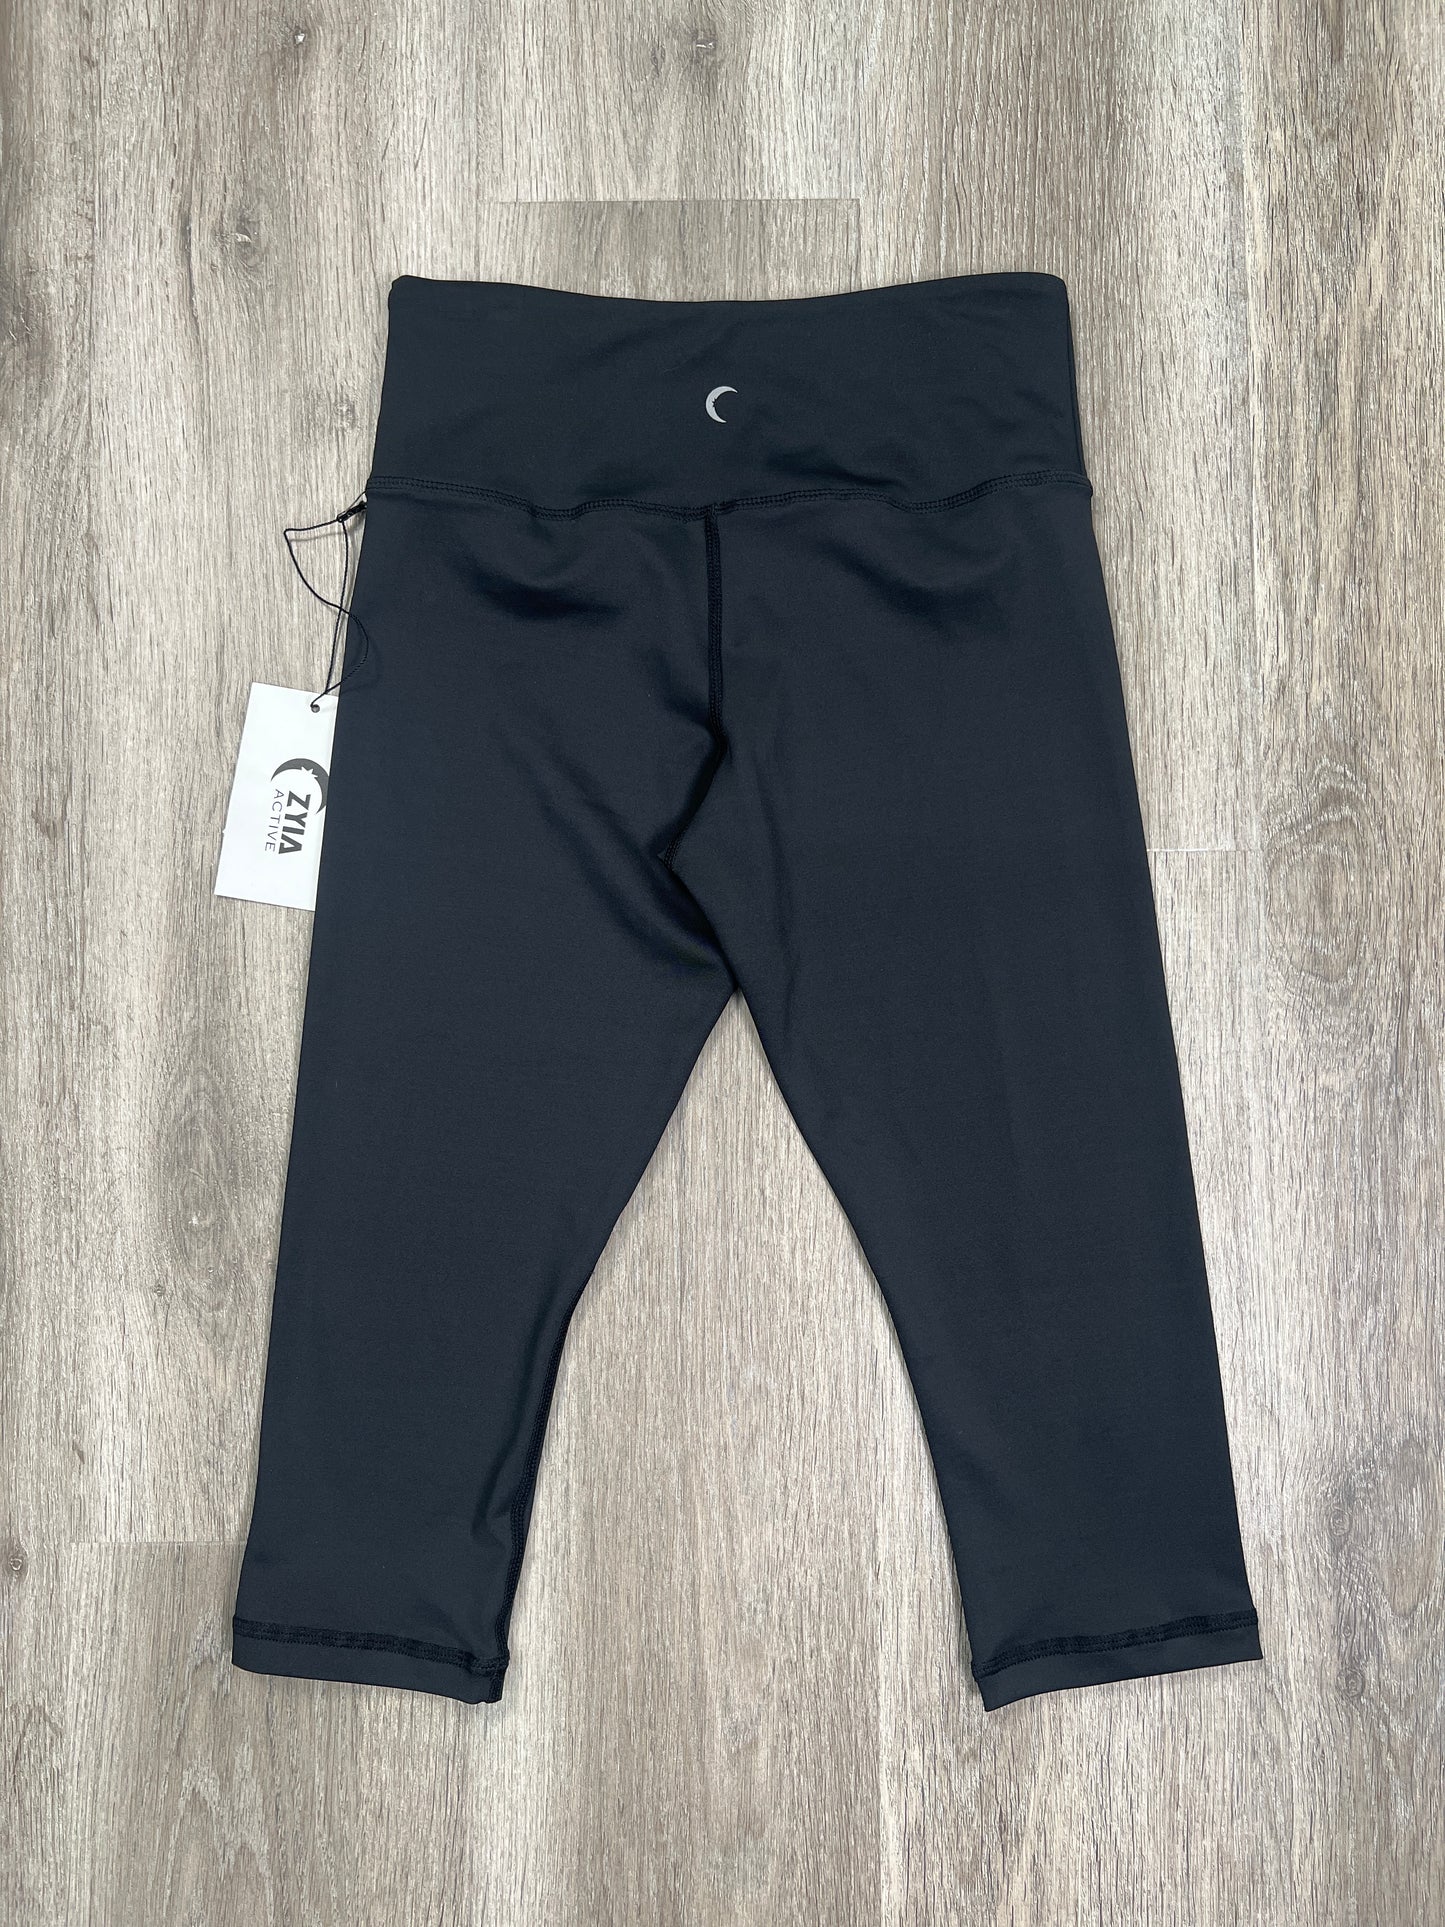 Athletic Leggings Capris By Zyia  Size: M